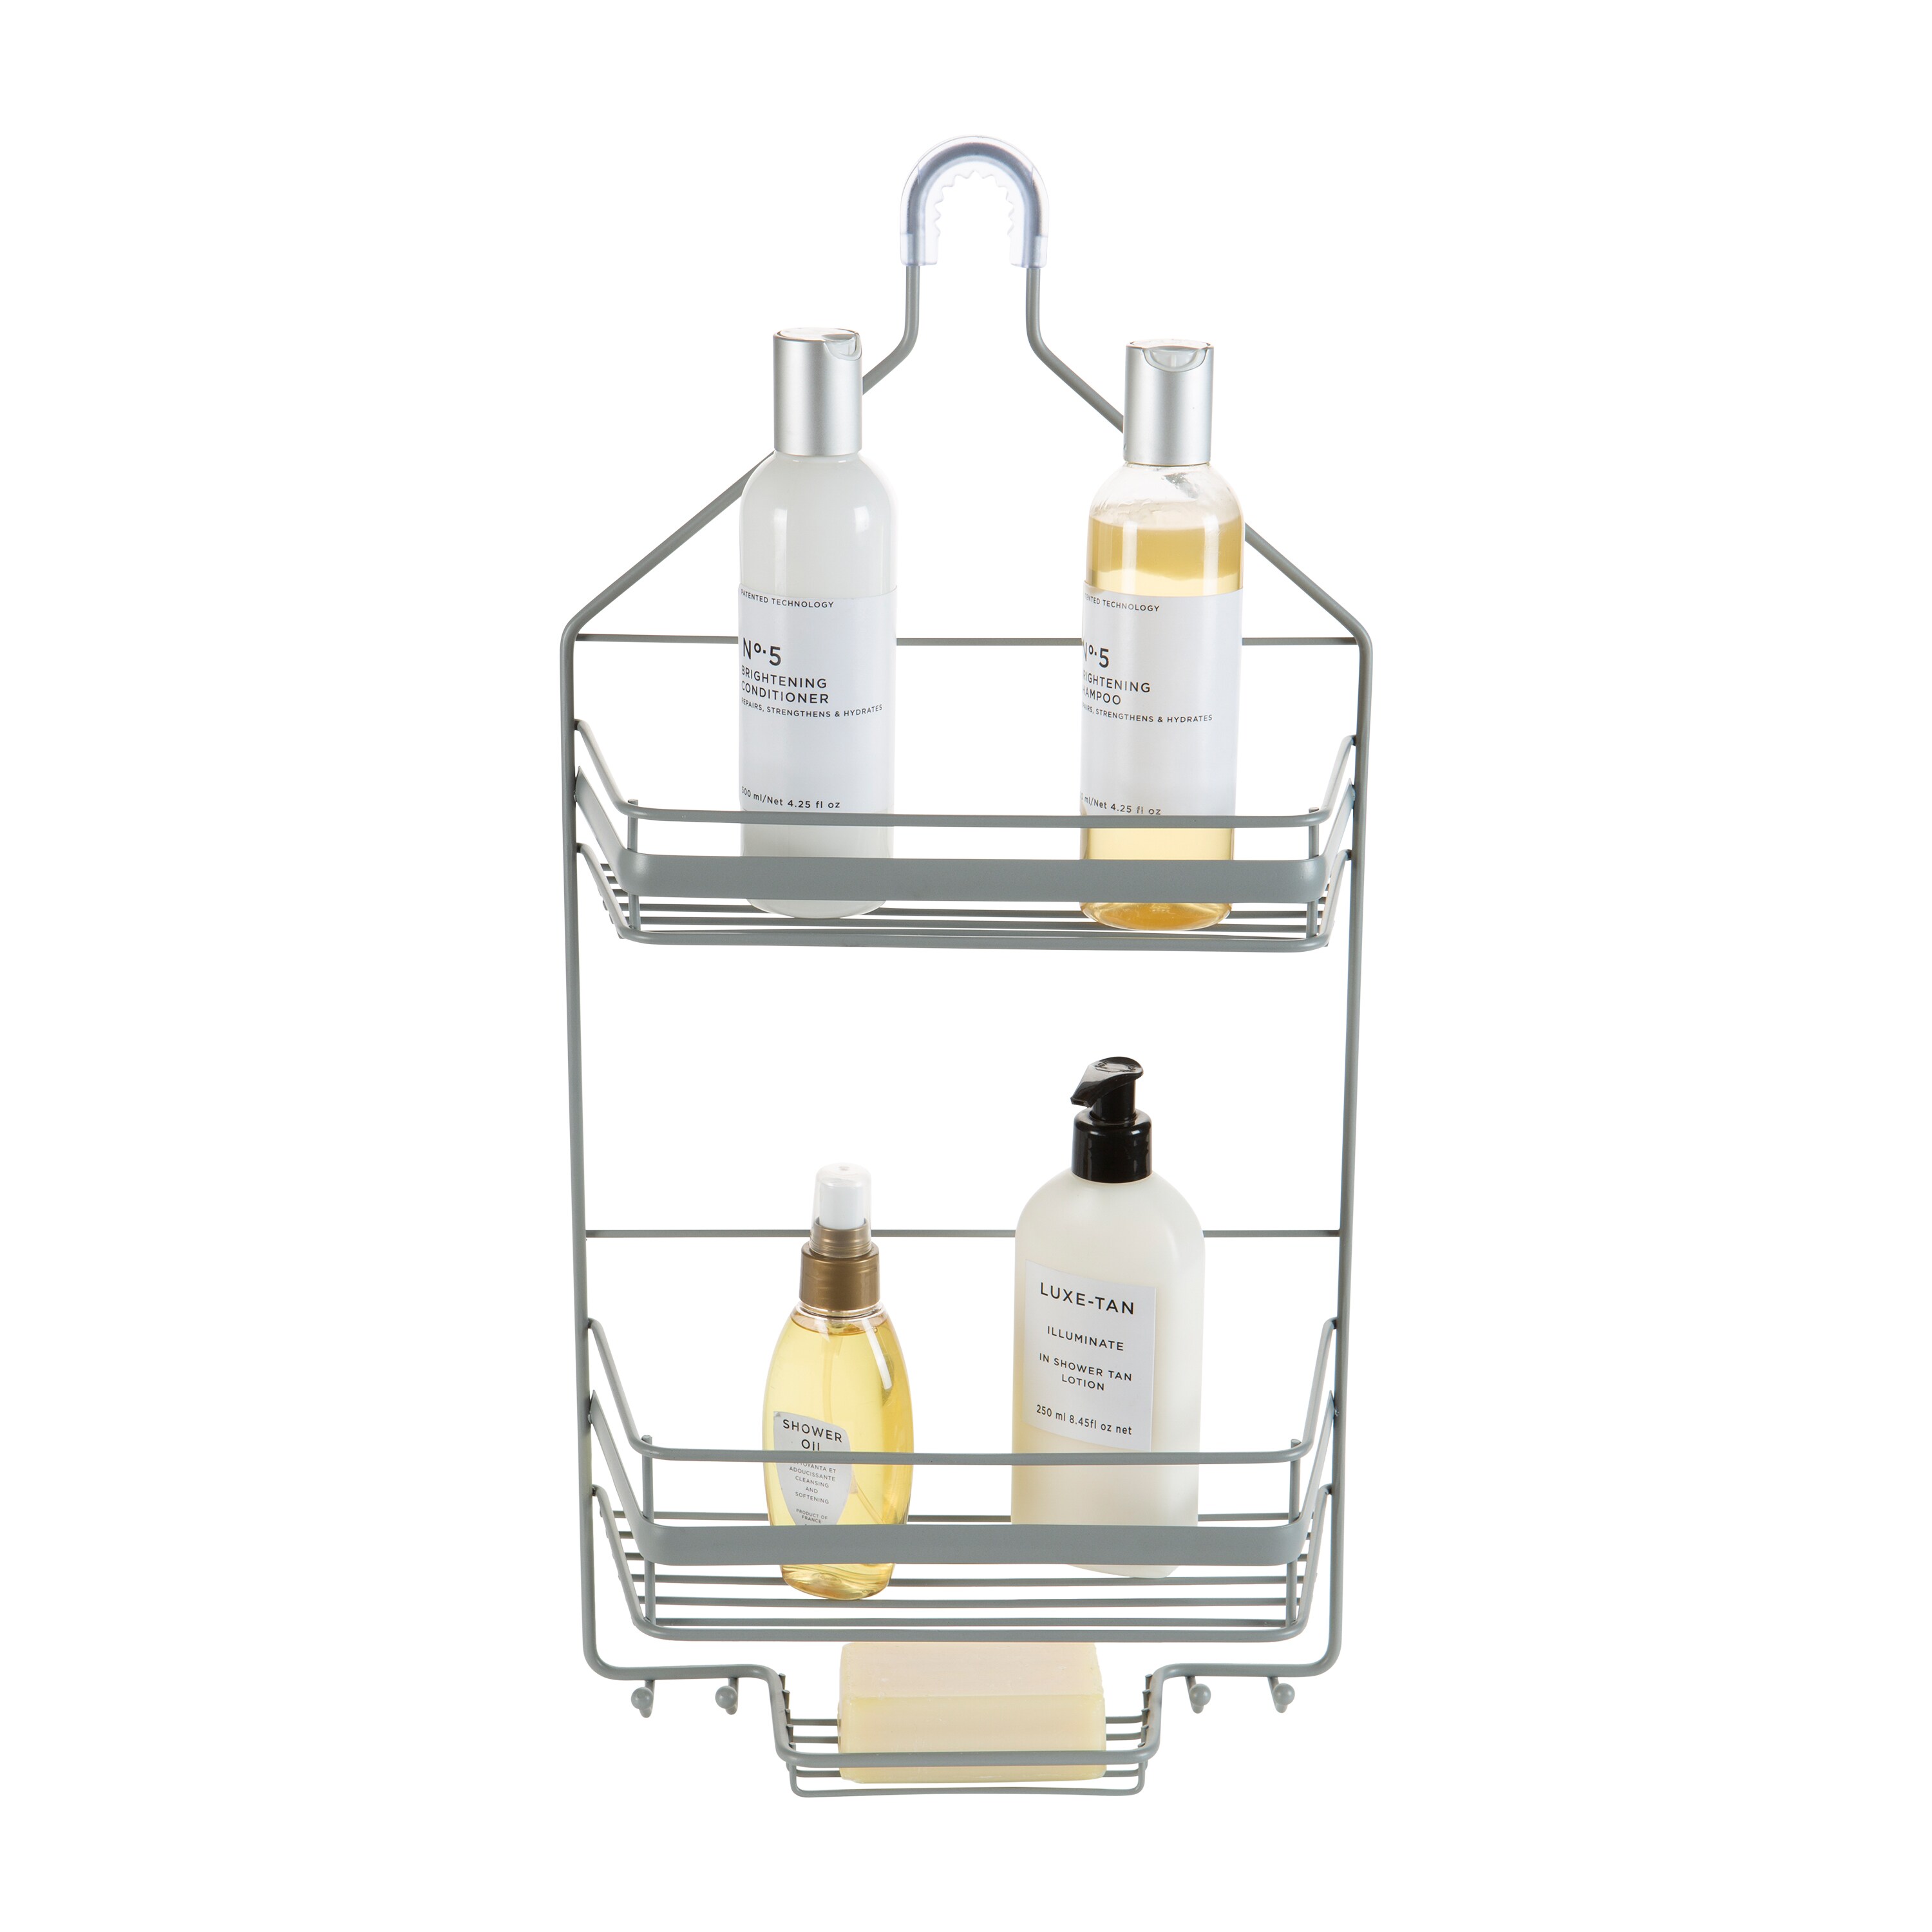 Bath Bliss White Steel 3-Shelf Hanging Shower Caddy 5.31-in x 11.02-in x  25.98-in in the Bathtub & Shower Caddies department at